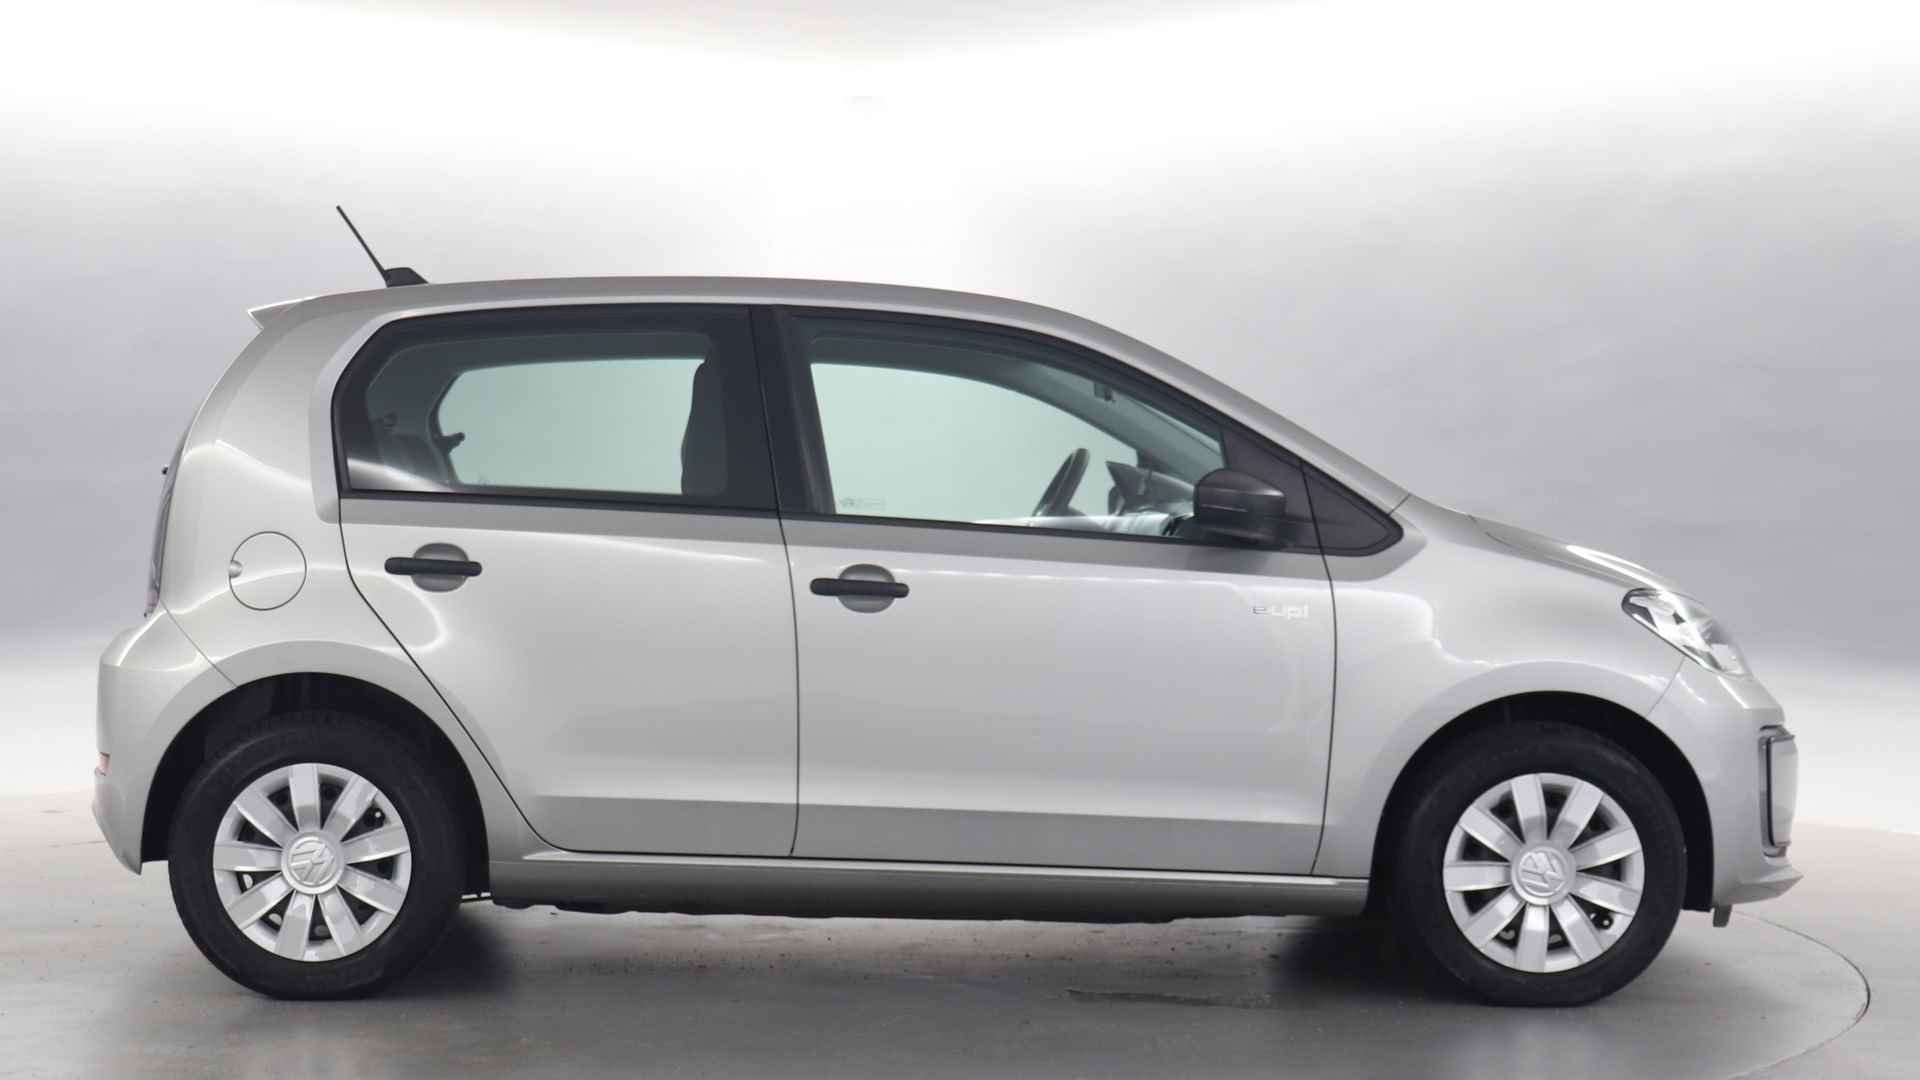 Volkswagen e-Up! e-up! / Airco / Climate control / Wordt verwacht - 10/28